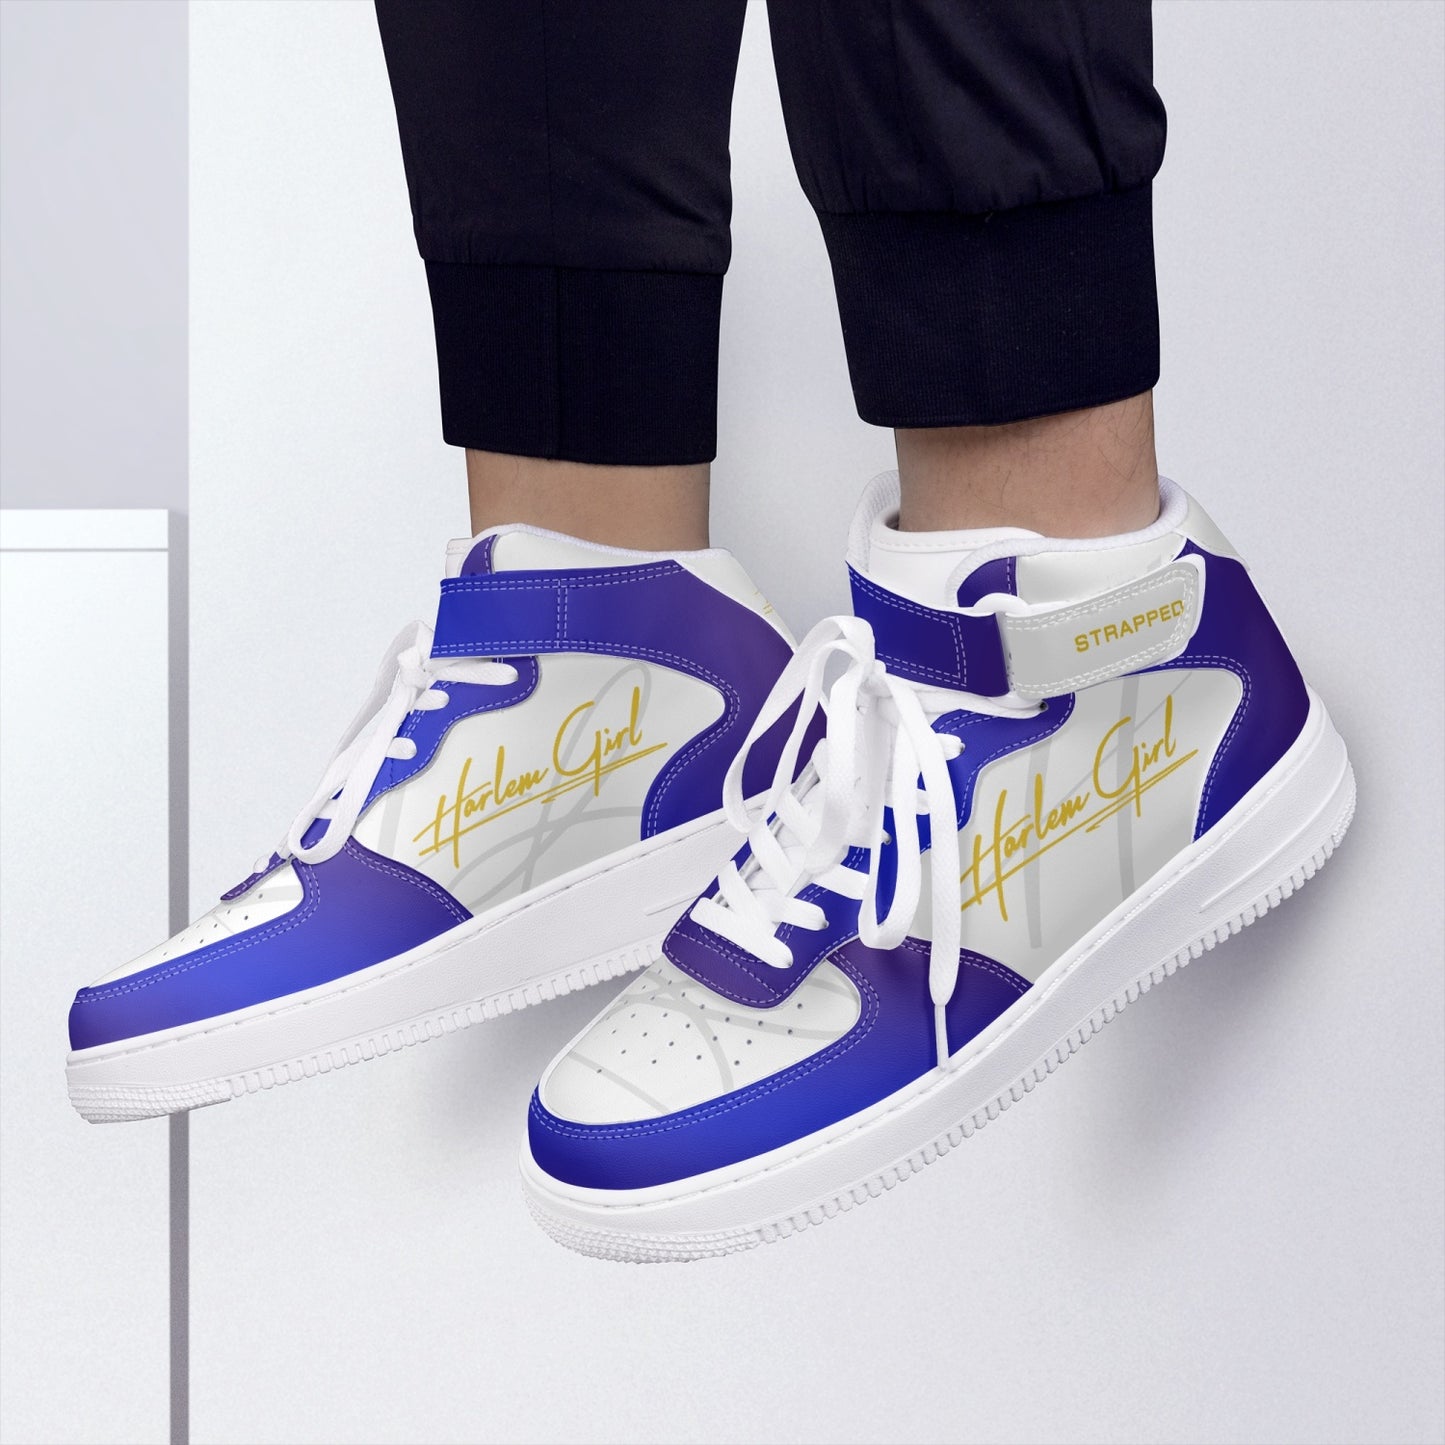 HB Harlem Girl "Strapped" Women's Leather Hi Top Kicks - Blue & Gold-Top Leather Sports Sneakers